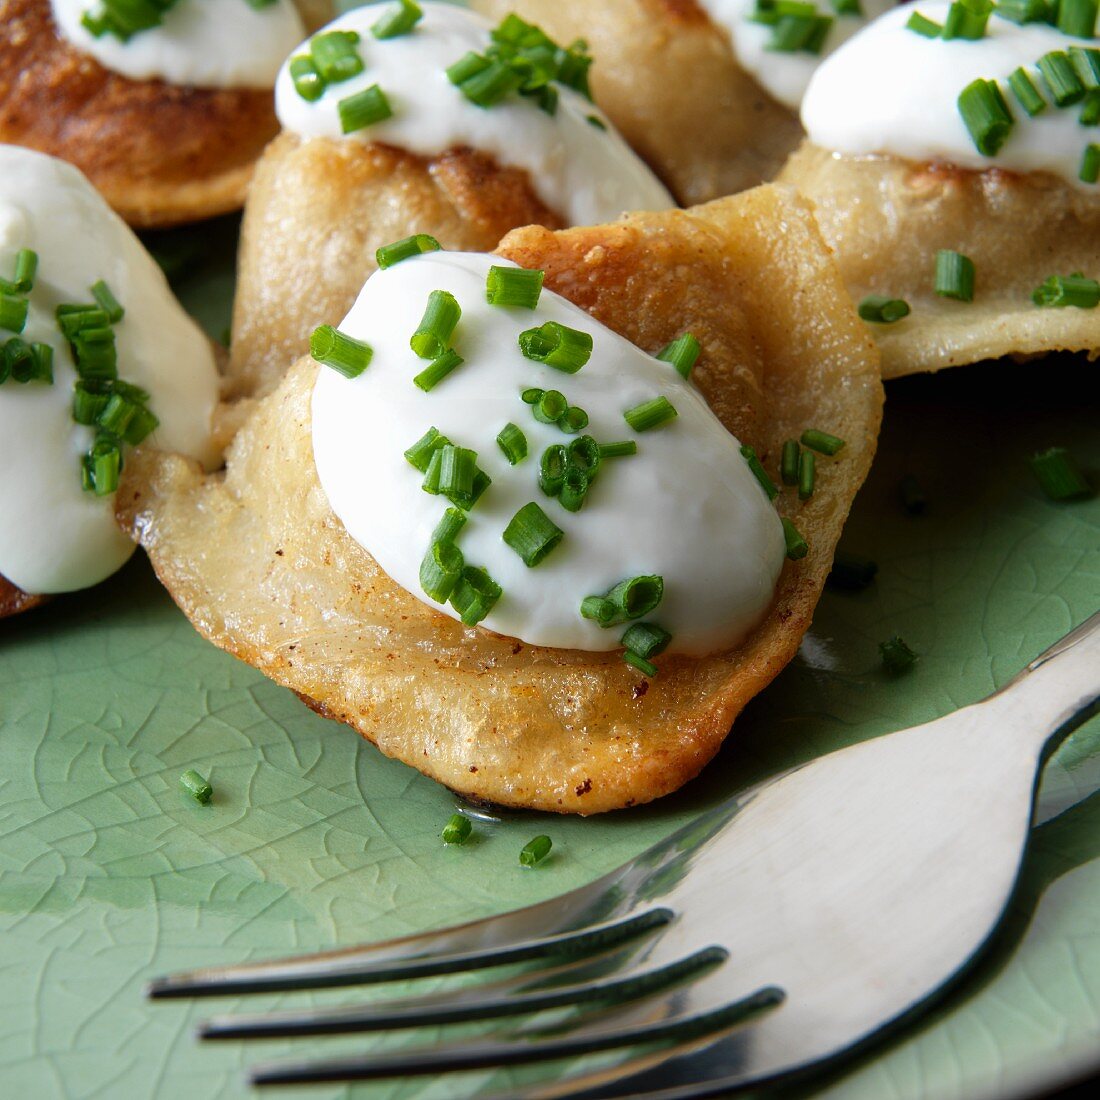 Potato filled pierogies (Pirogi) with sour cream and chives clos